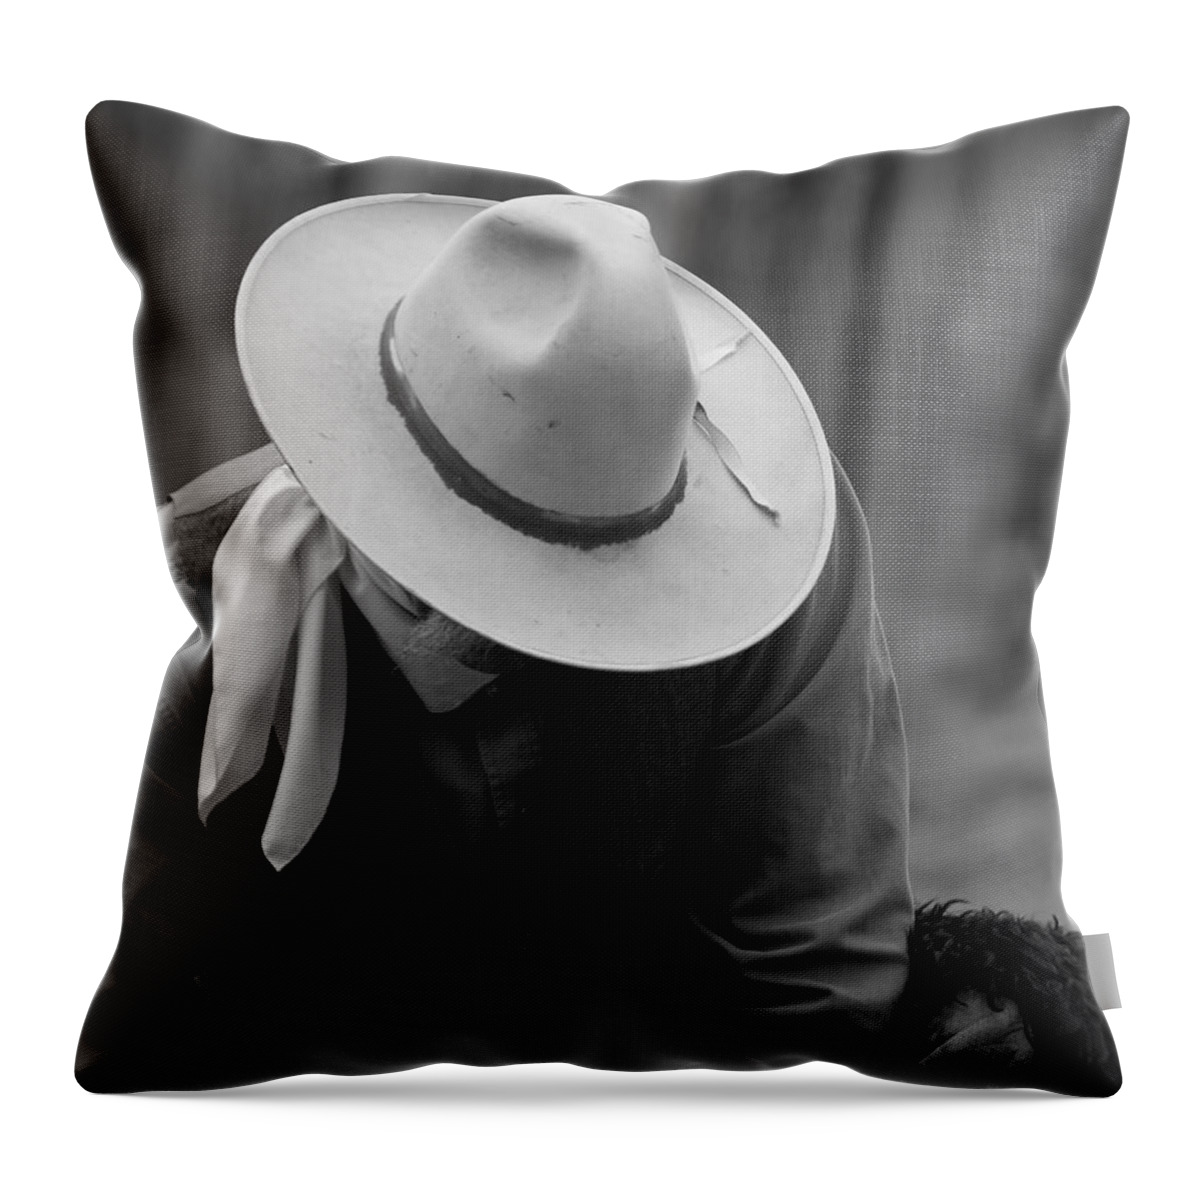 Hats Throw Pillow featuring the photograph Cowboys Signature by Diane Bohna